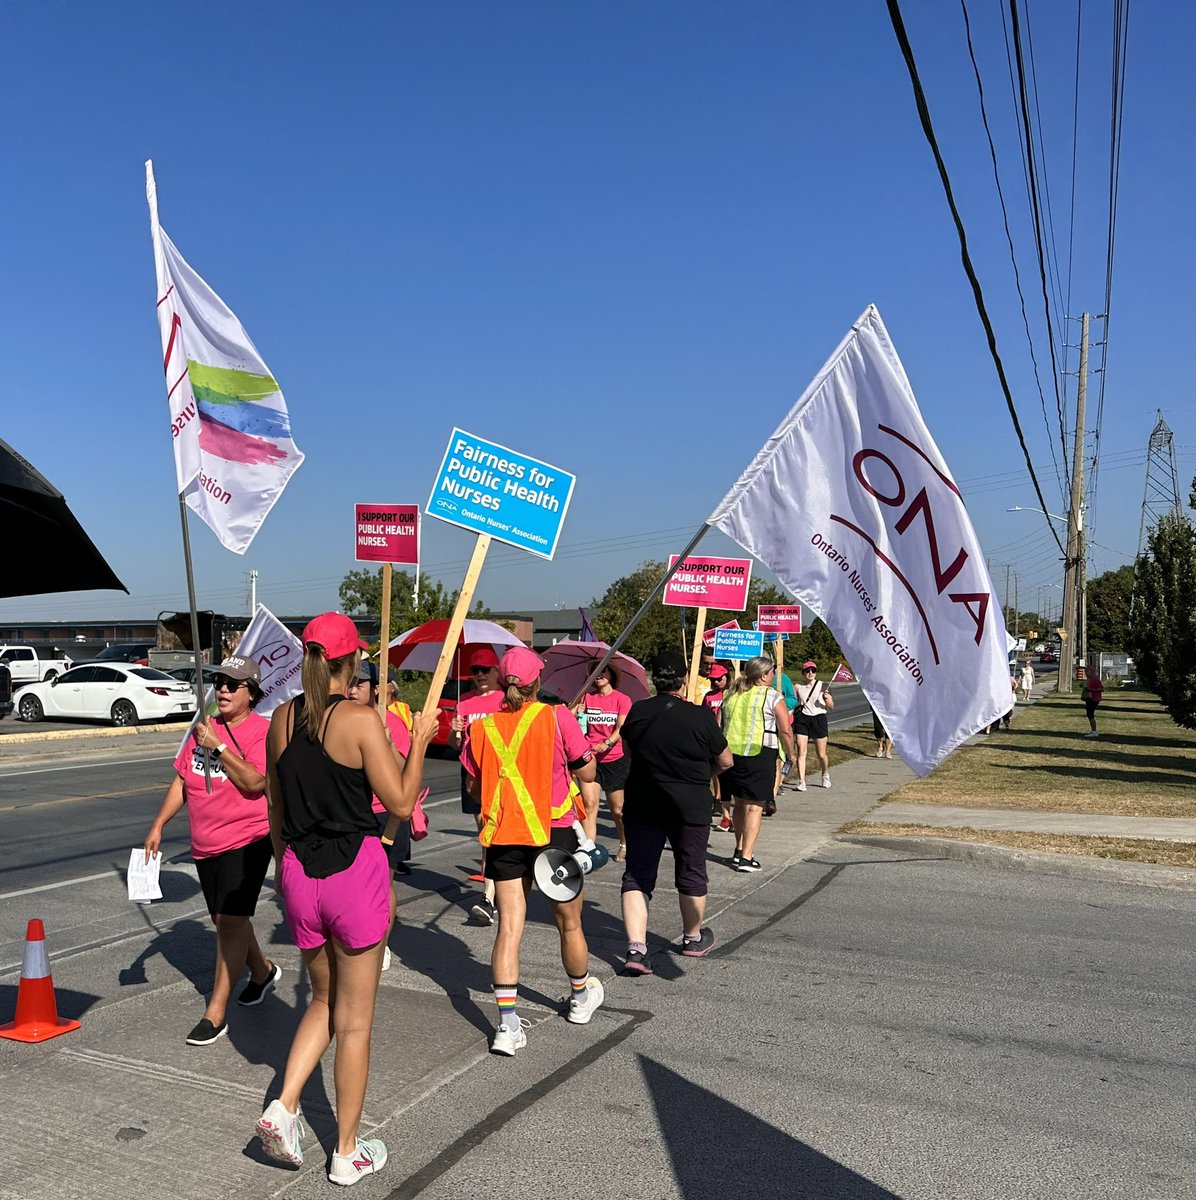 50 strong public health nurses on strike Why? Question of Respect Safety and the pride in their community Hasting and Public Edward Public health unit @ontarionurses #Solidarity from 250k nurses across Canada @CFNU